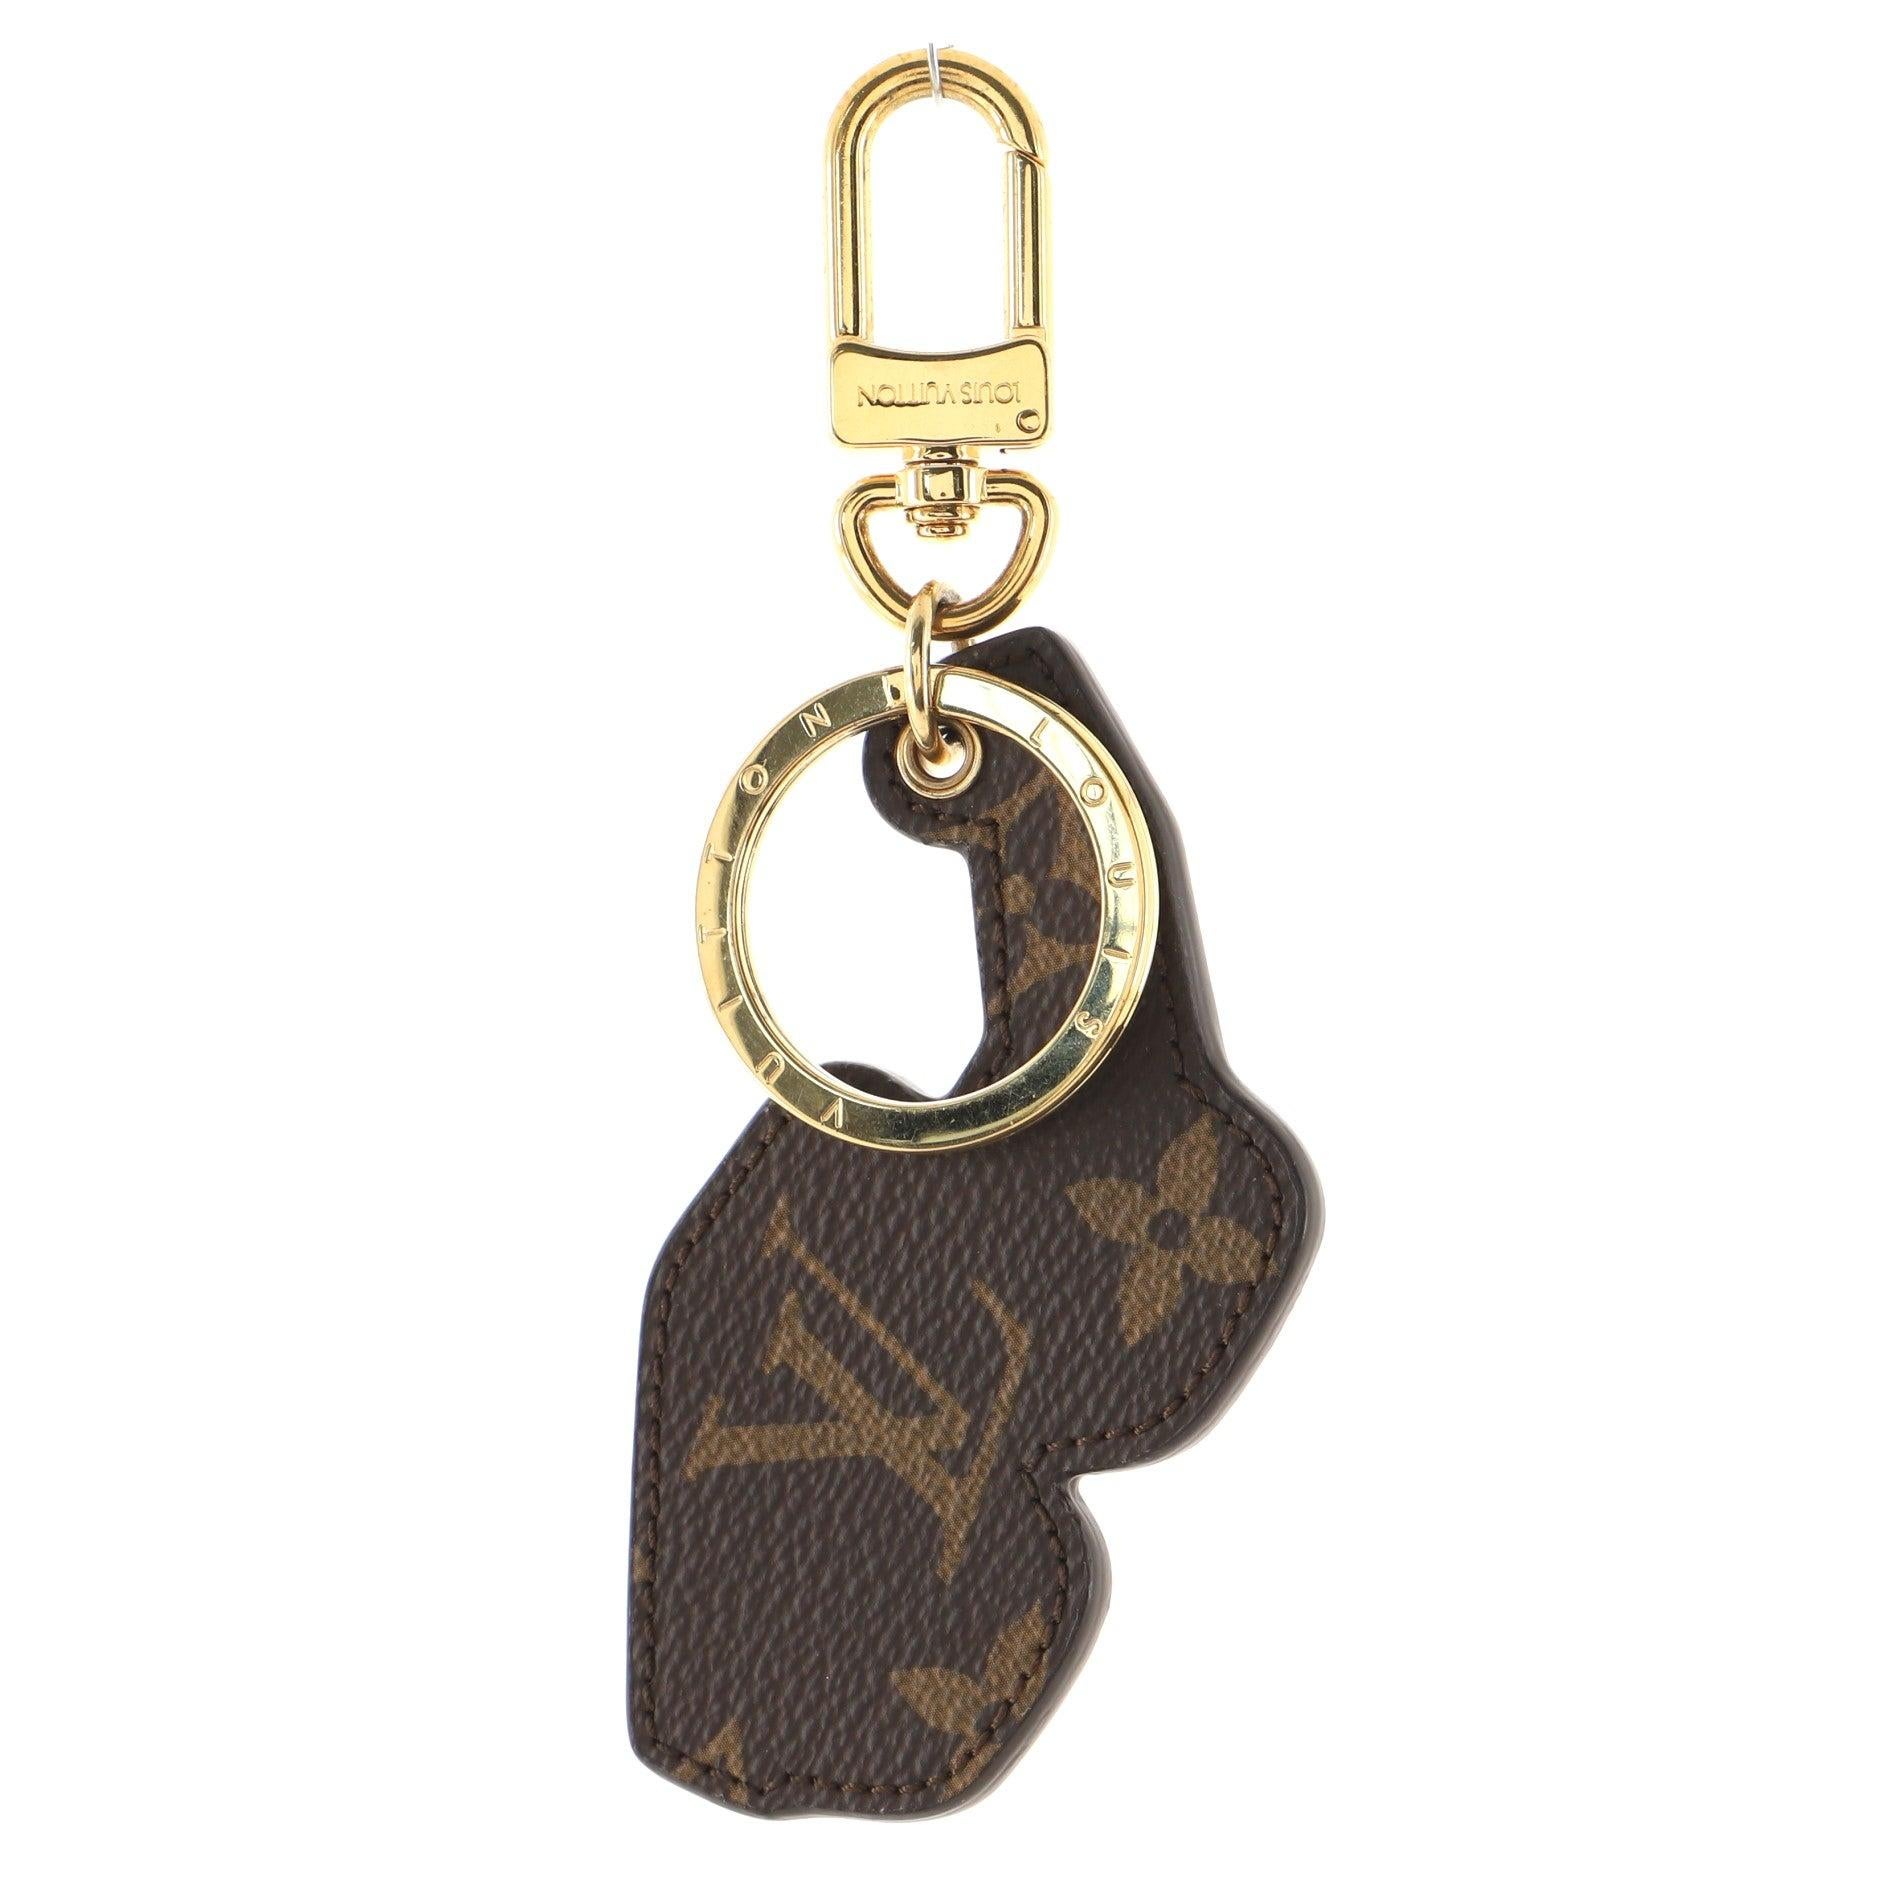 The 1.1 Millionaire Mini Icons bag charm and key holder by Virgil Abloh's design hearken back to Al Capone's old Chicago, with vintage Monogram sunglasses in embossed cowhide leather. This versatile piece is delicately engraved with the Louis